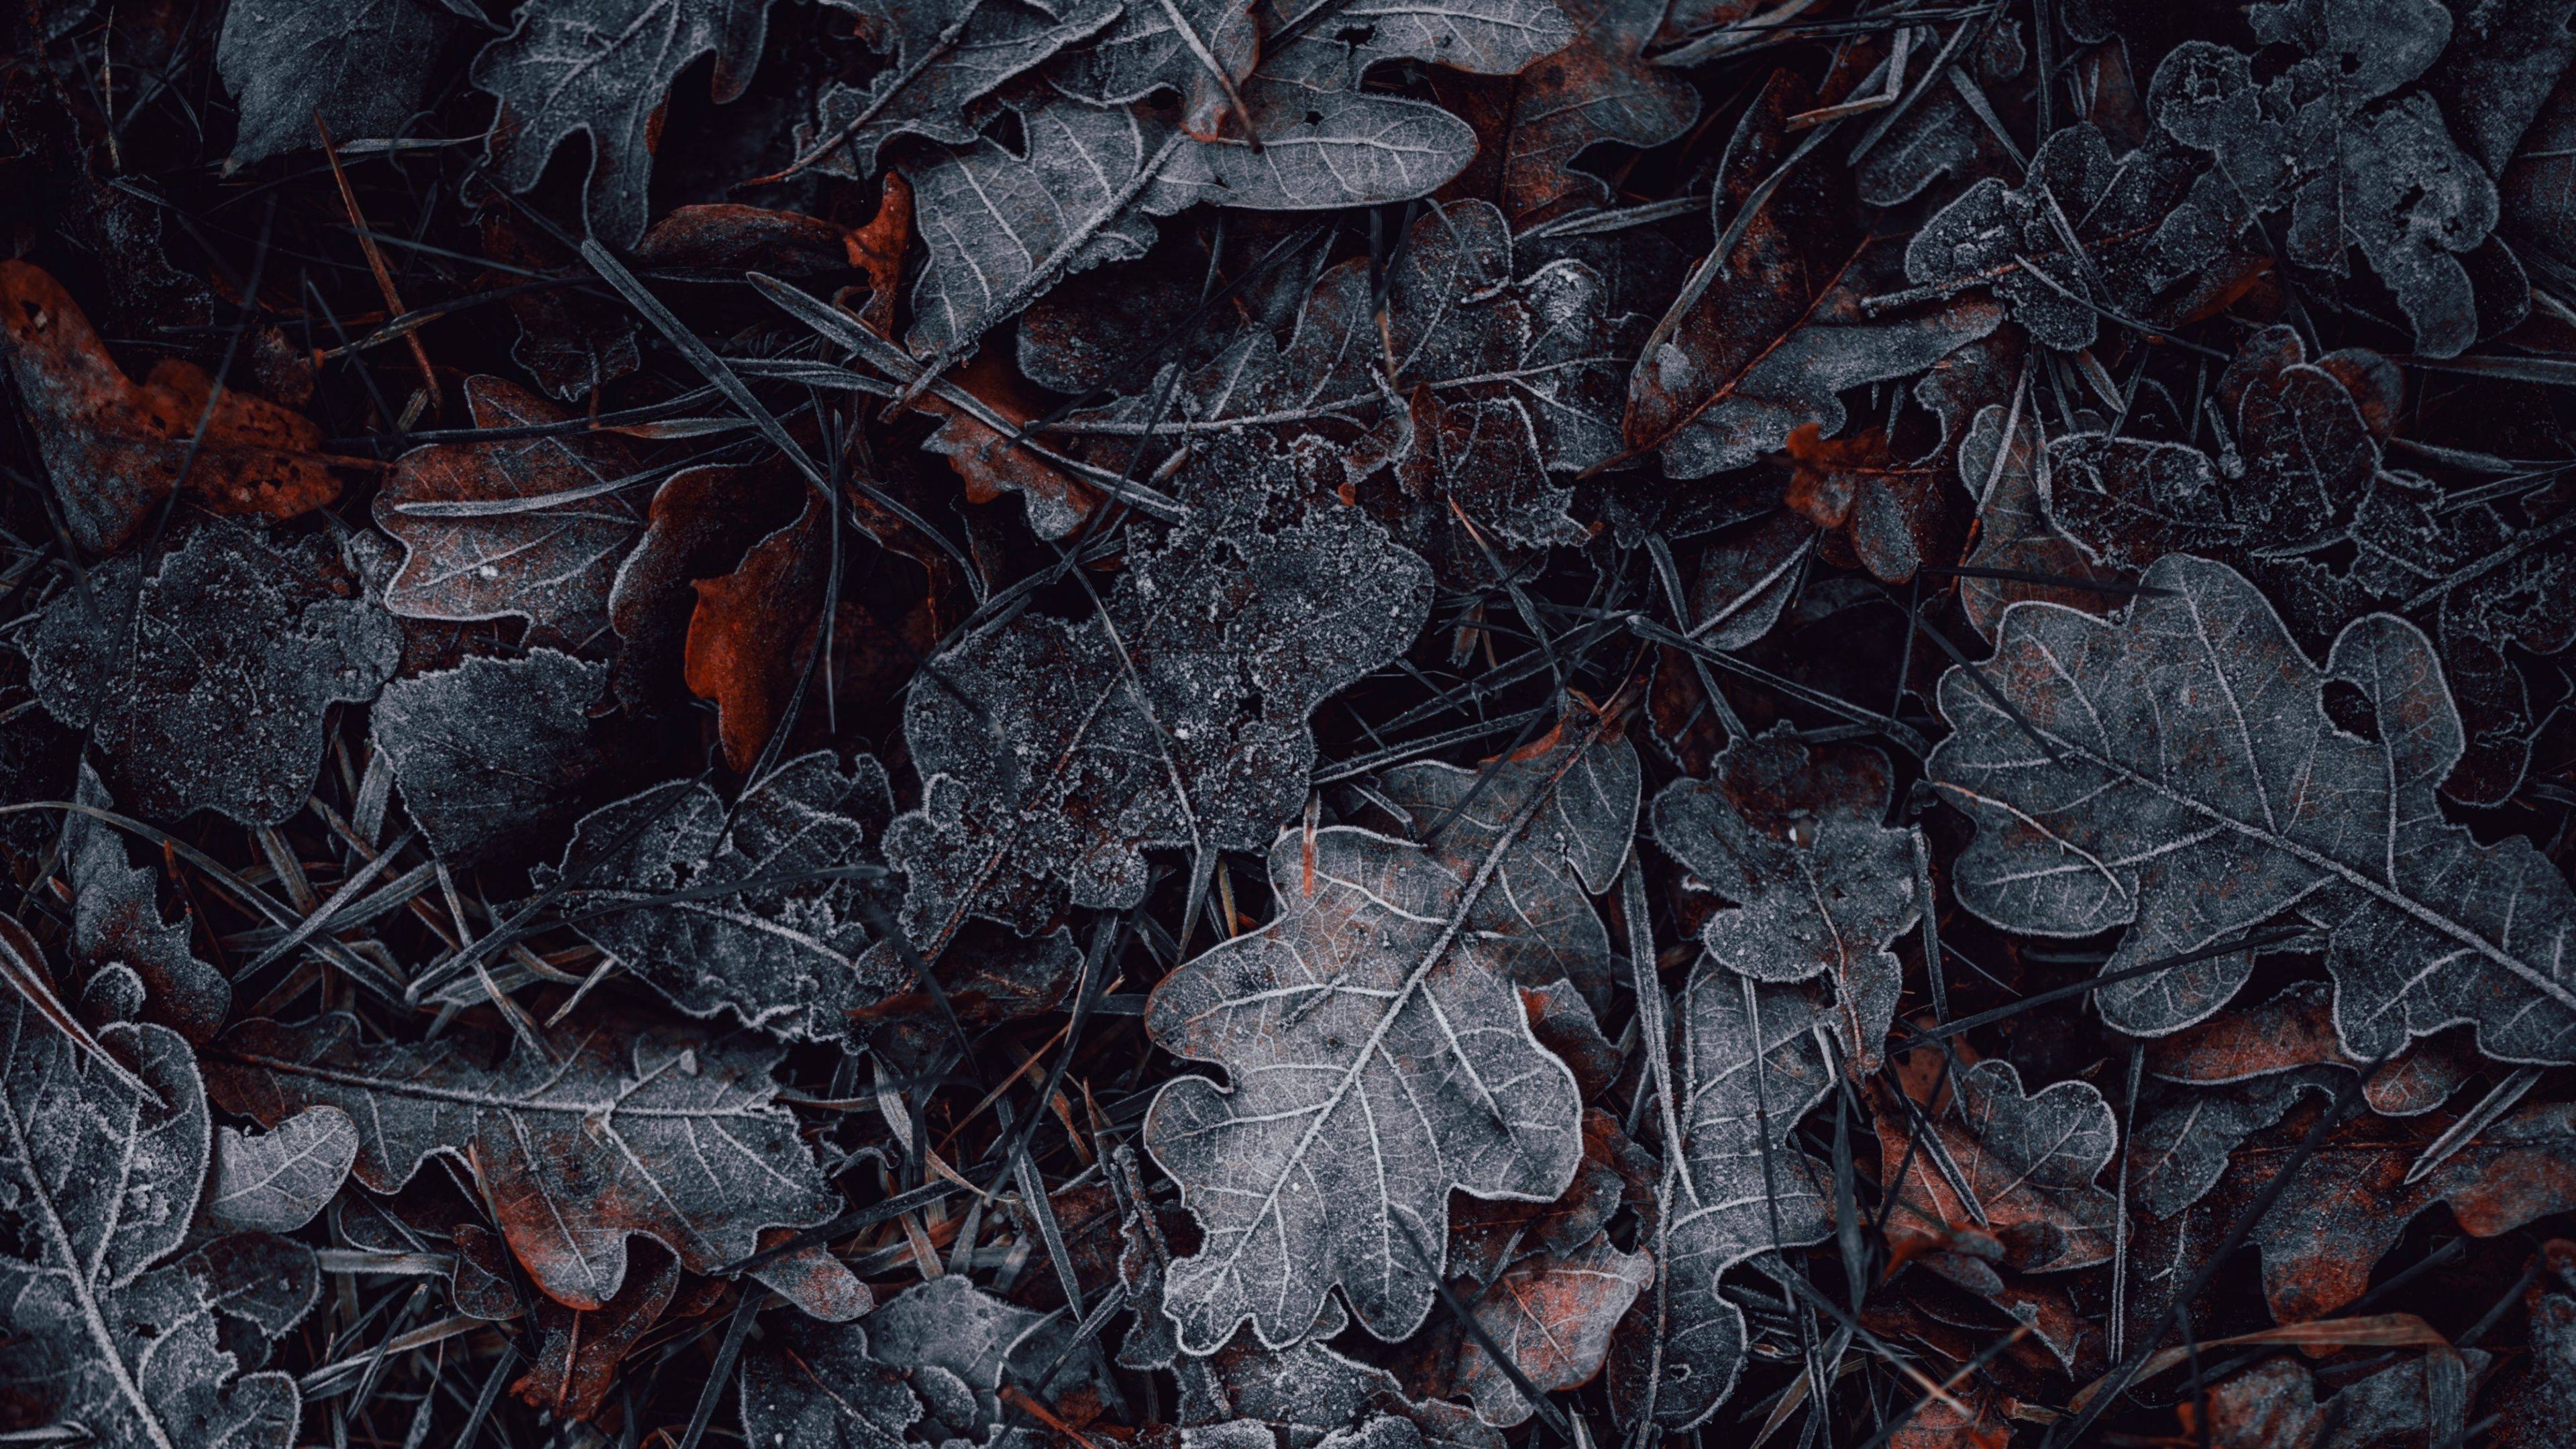 A dark and moody image of frosty leaves on the ground. - Winter, leaves